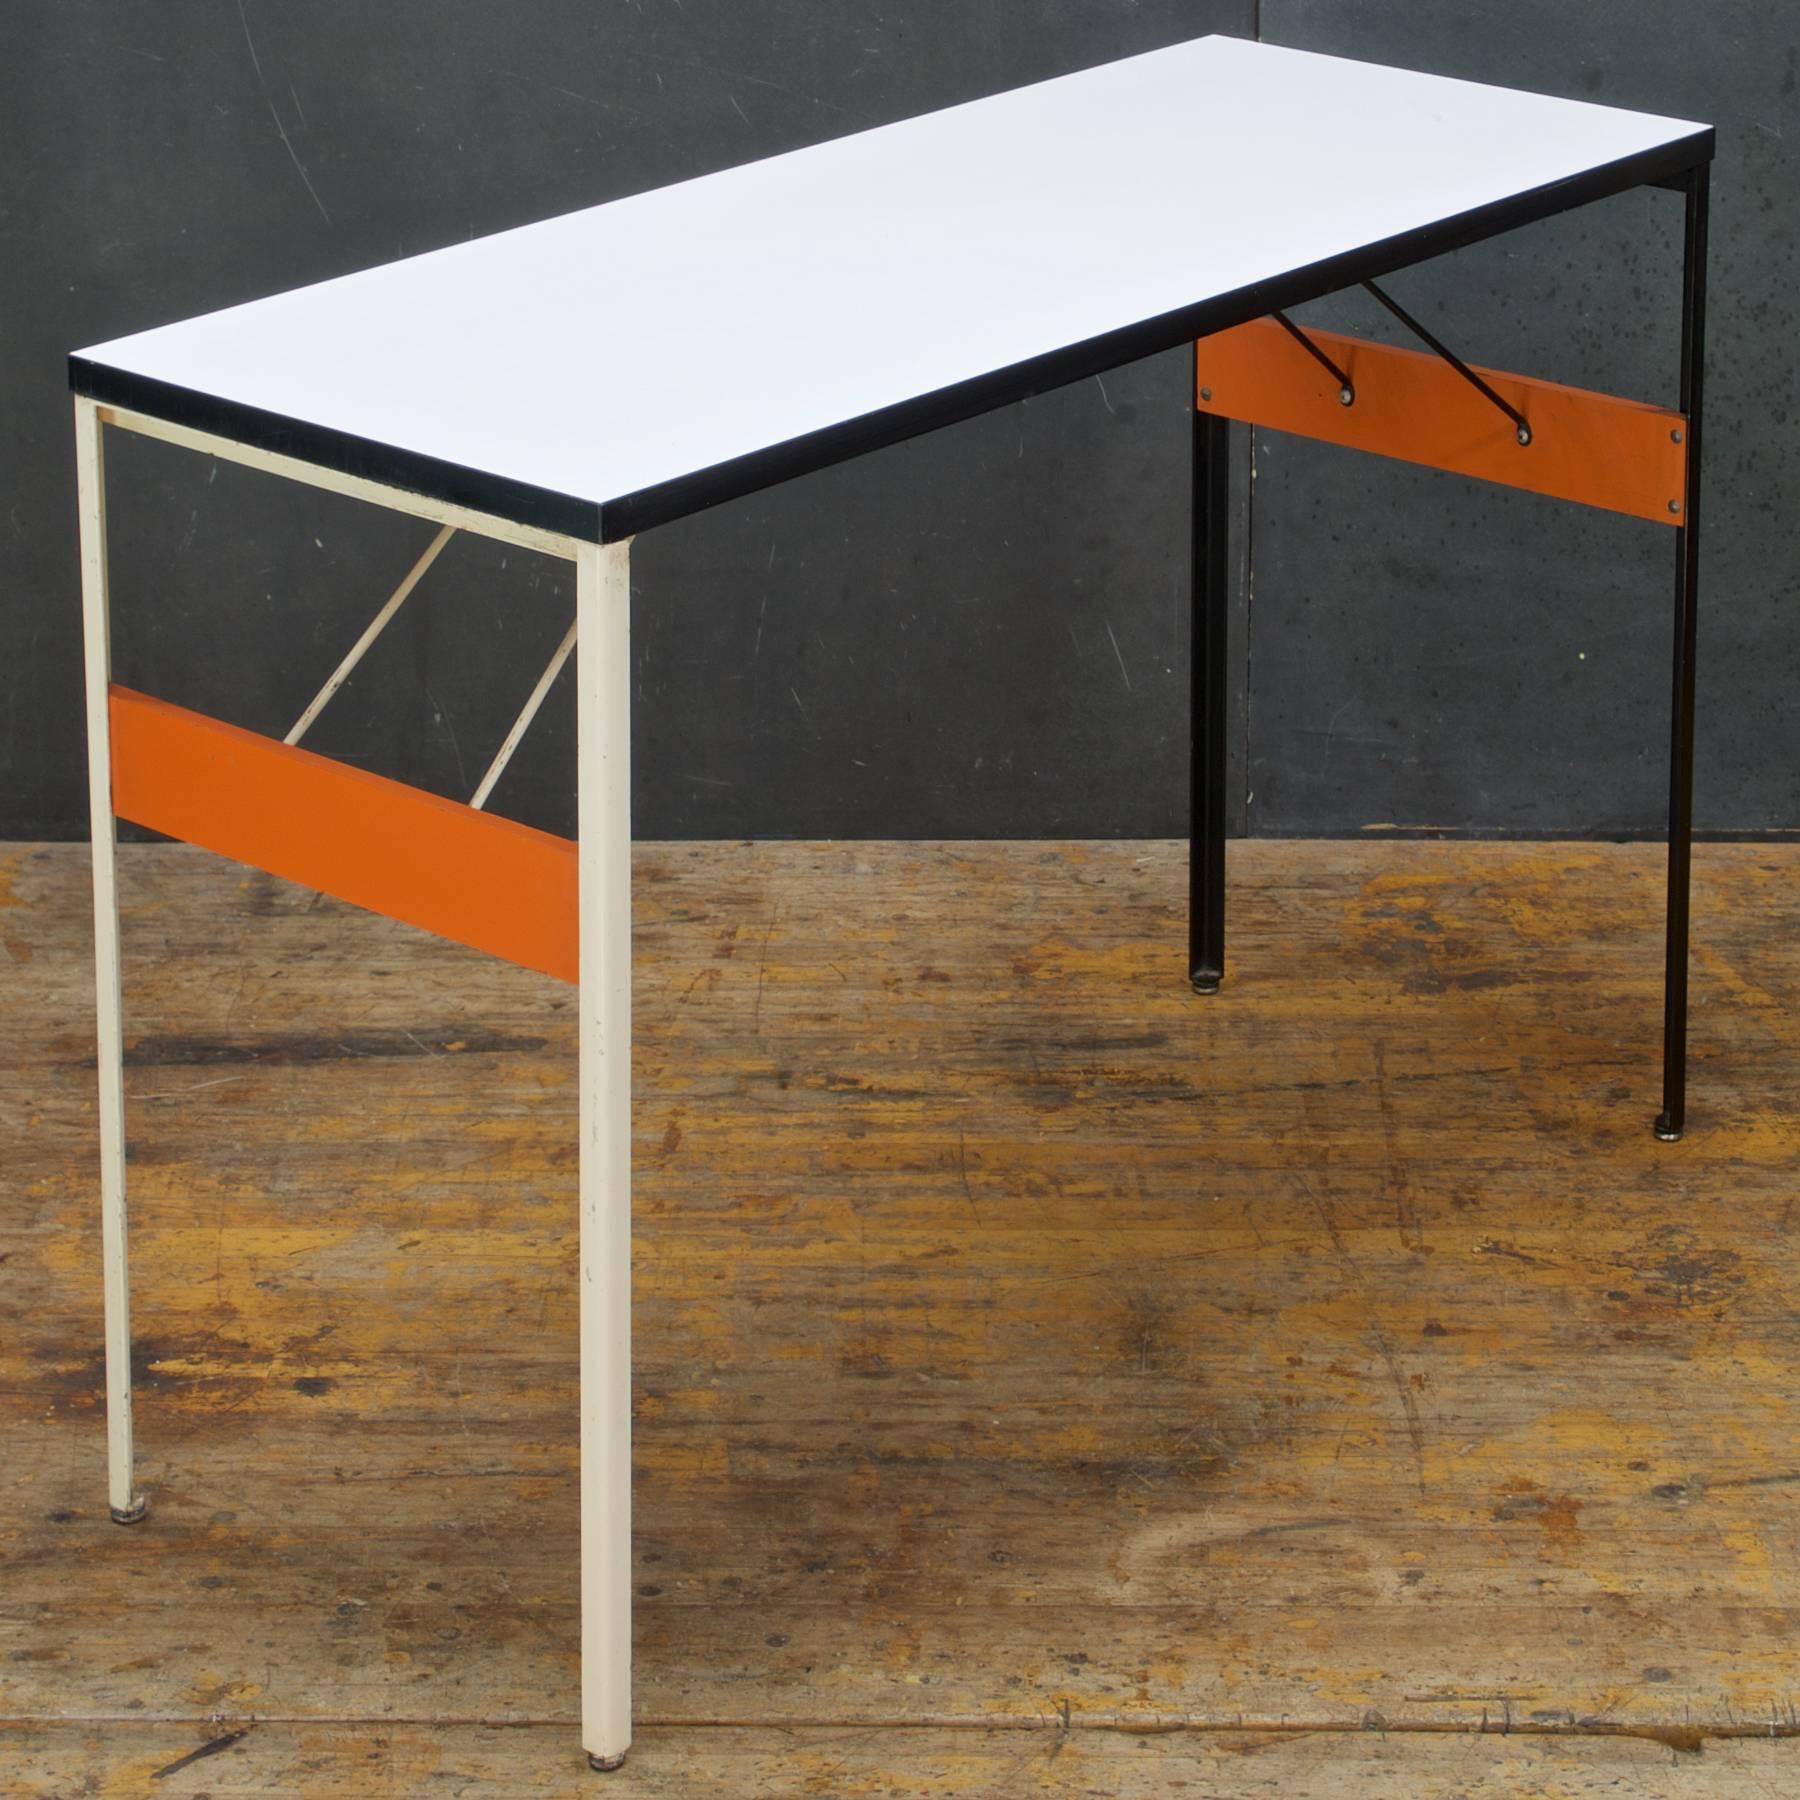 Beautiful and Rare George Nelson Steel-frame Group worktable desk or console table by Herman Miller. Odd/Rare configuration or assemblage. Level, Sturdy and Usable. 

Will be shipped disassembled and shipped FEDEXground.